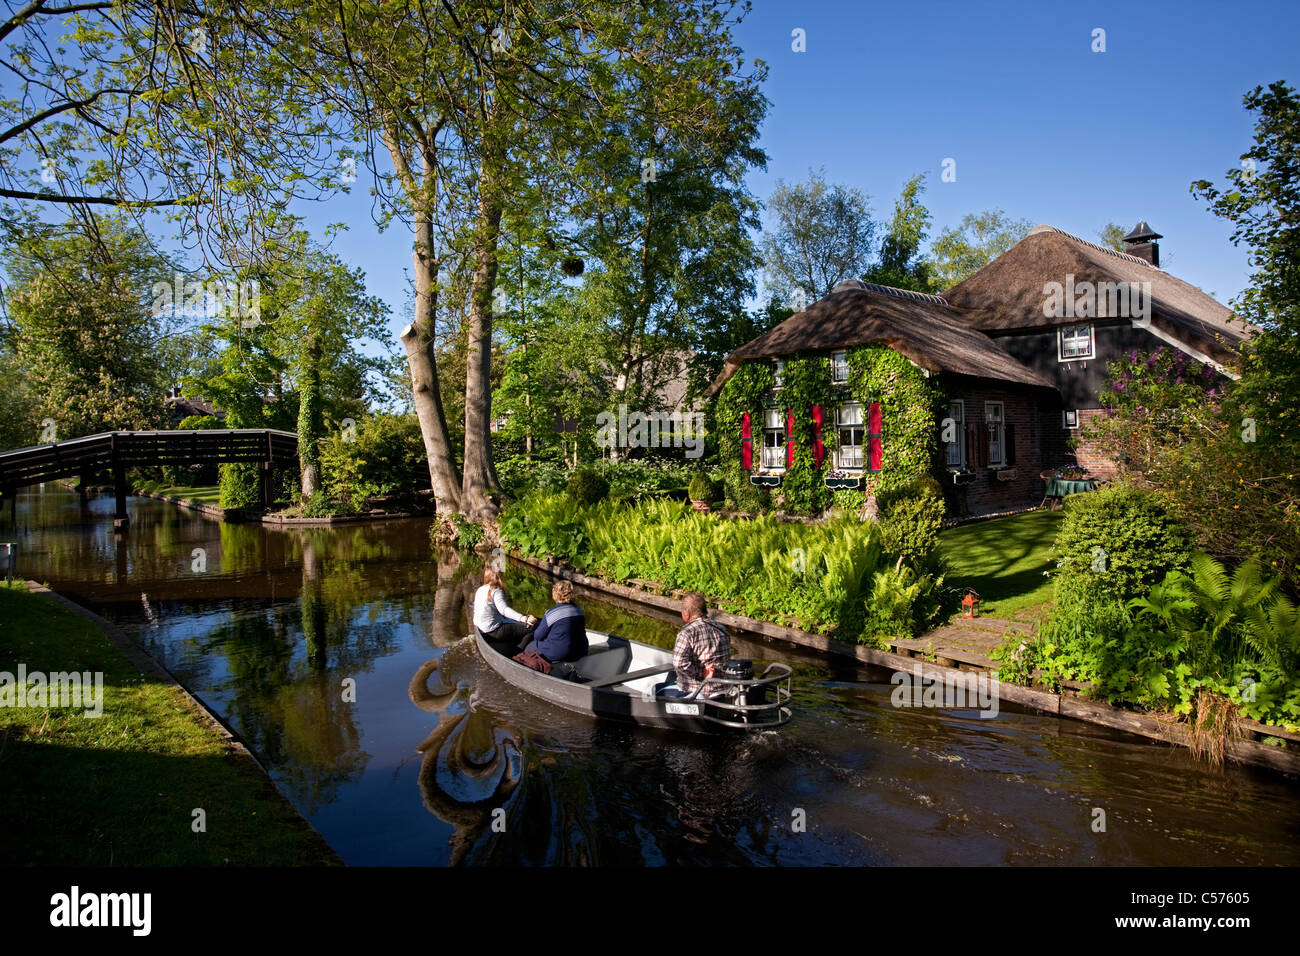 The Netherlands, Giethoorn, Village with almost only waterways. Tourists enjoying boat ride. Stock Photo